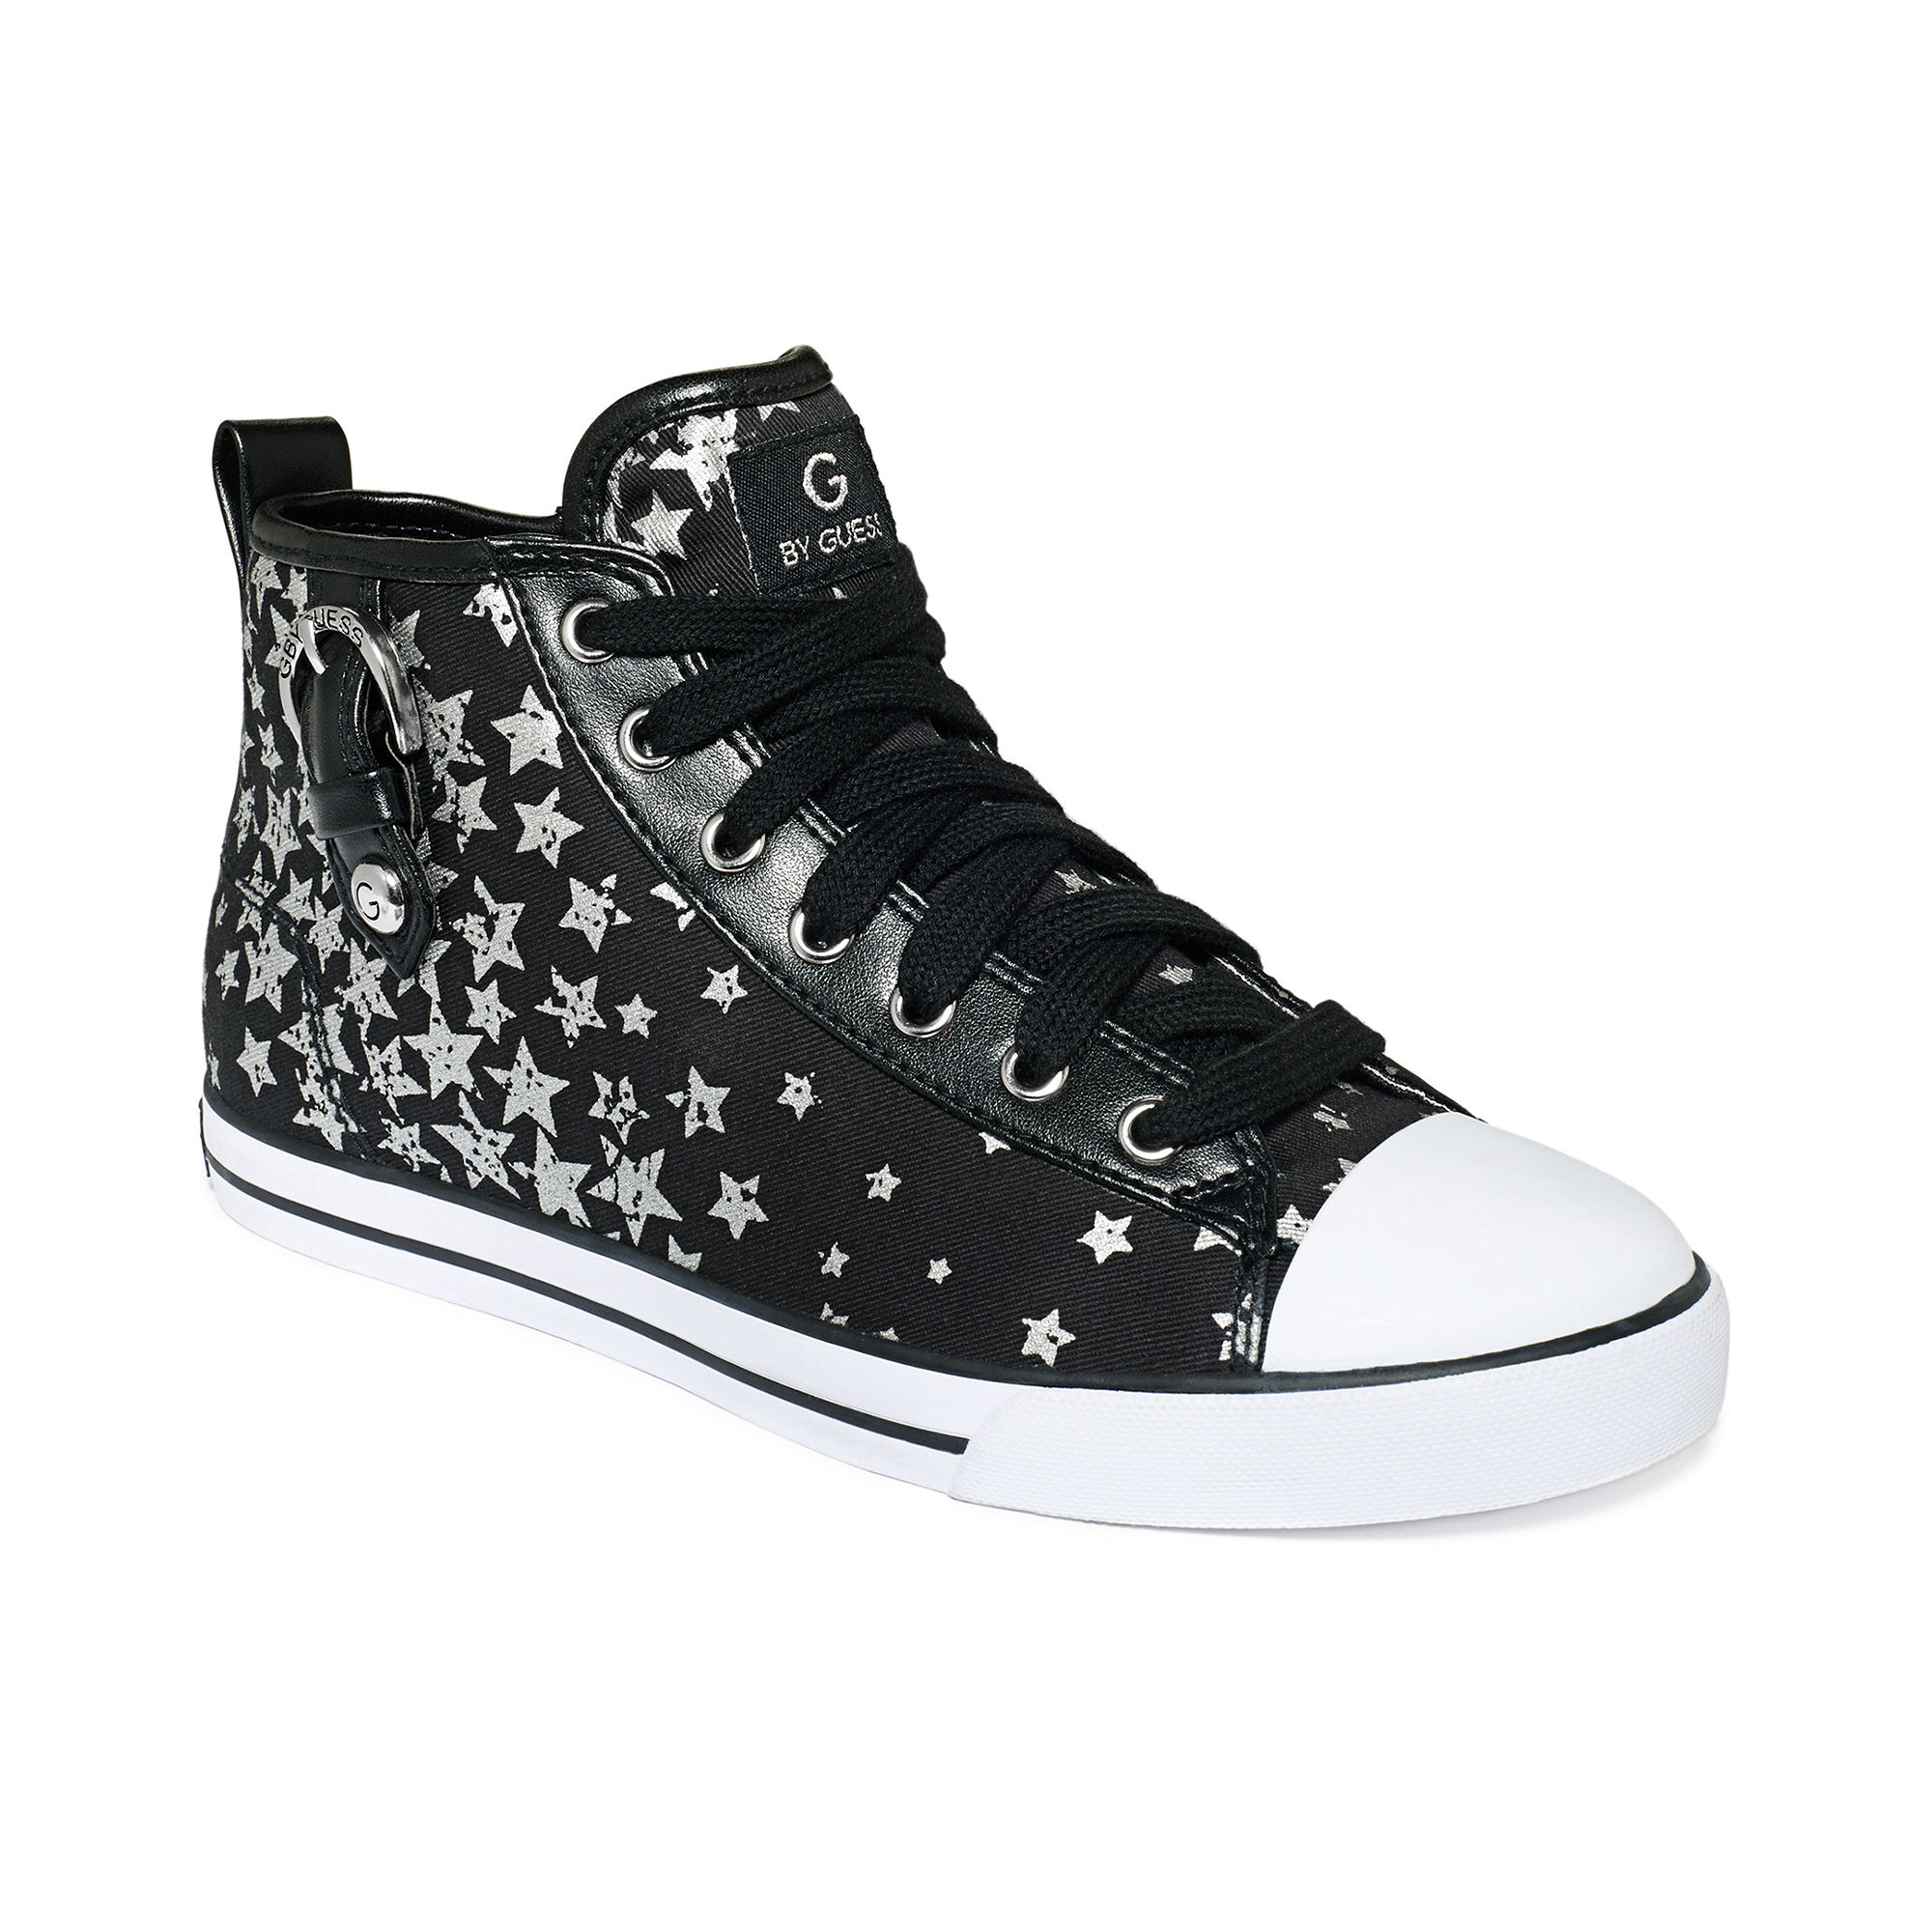 G By Guess G By Guess Shoes Maree High Top Sneakers in Black (Black ...